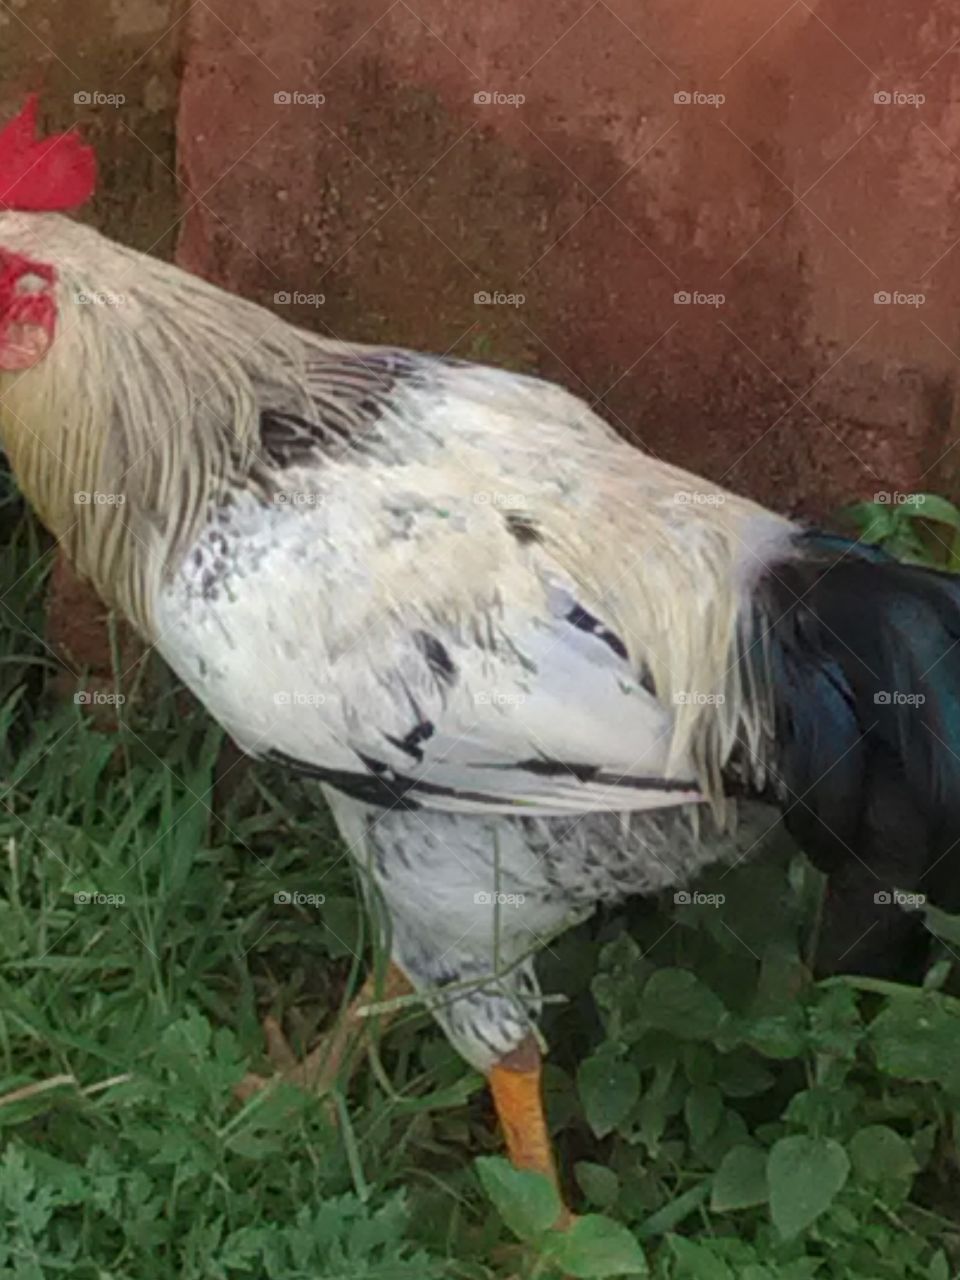 This is a hen she is descoverd food.